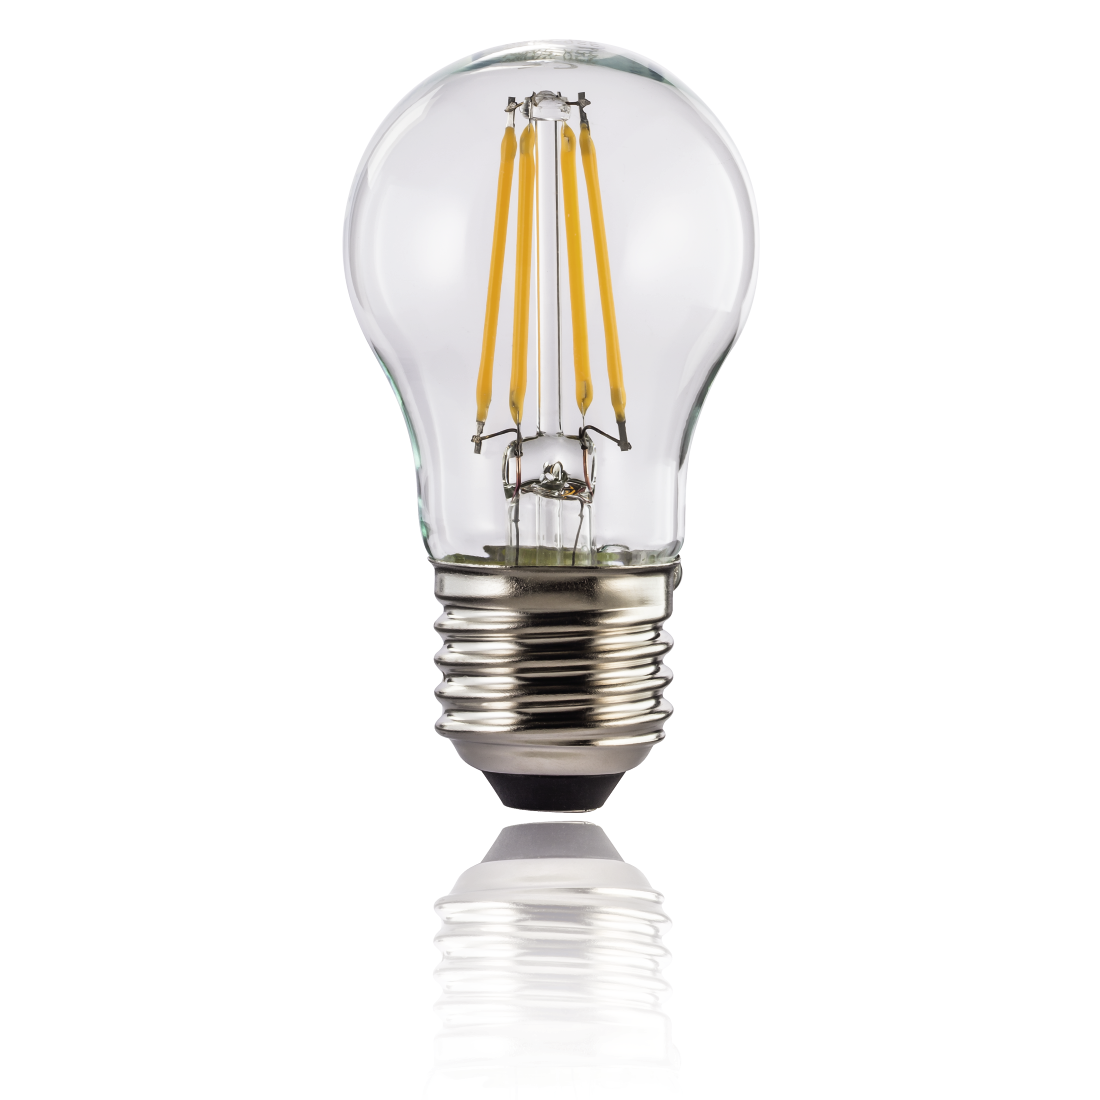 abx2 High-Res Image 2 - Xavax, LED Filament, E27, 470lm replaces 40W, drop bulb, warm white